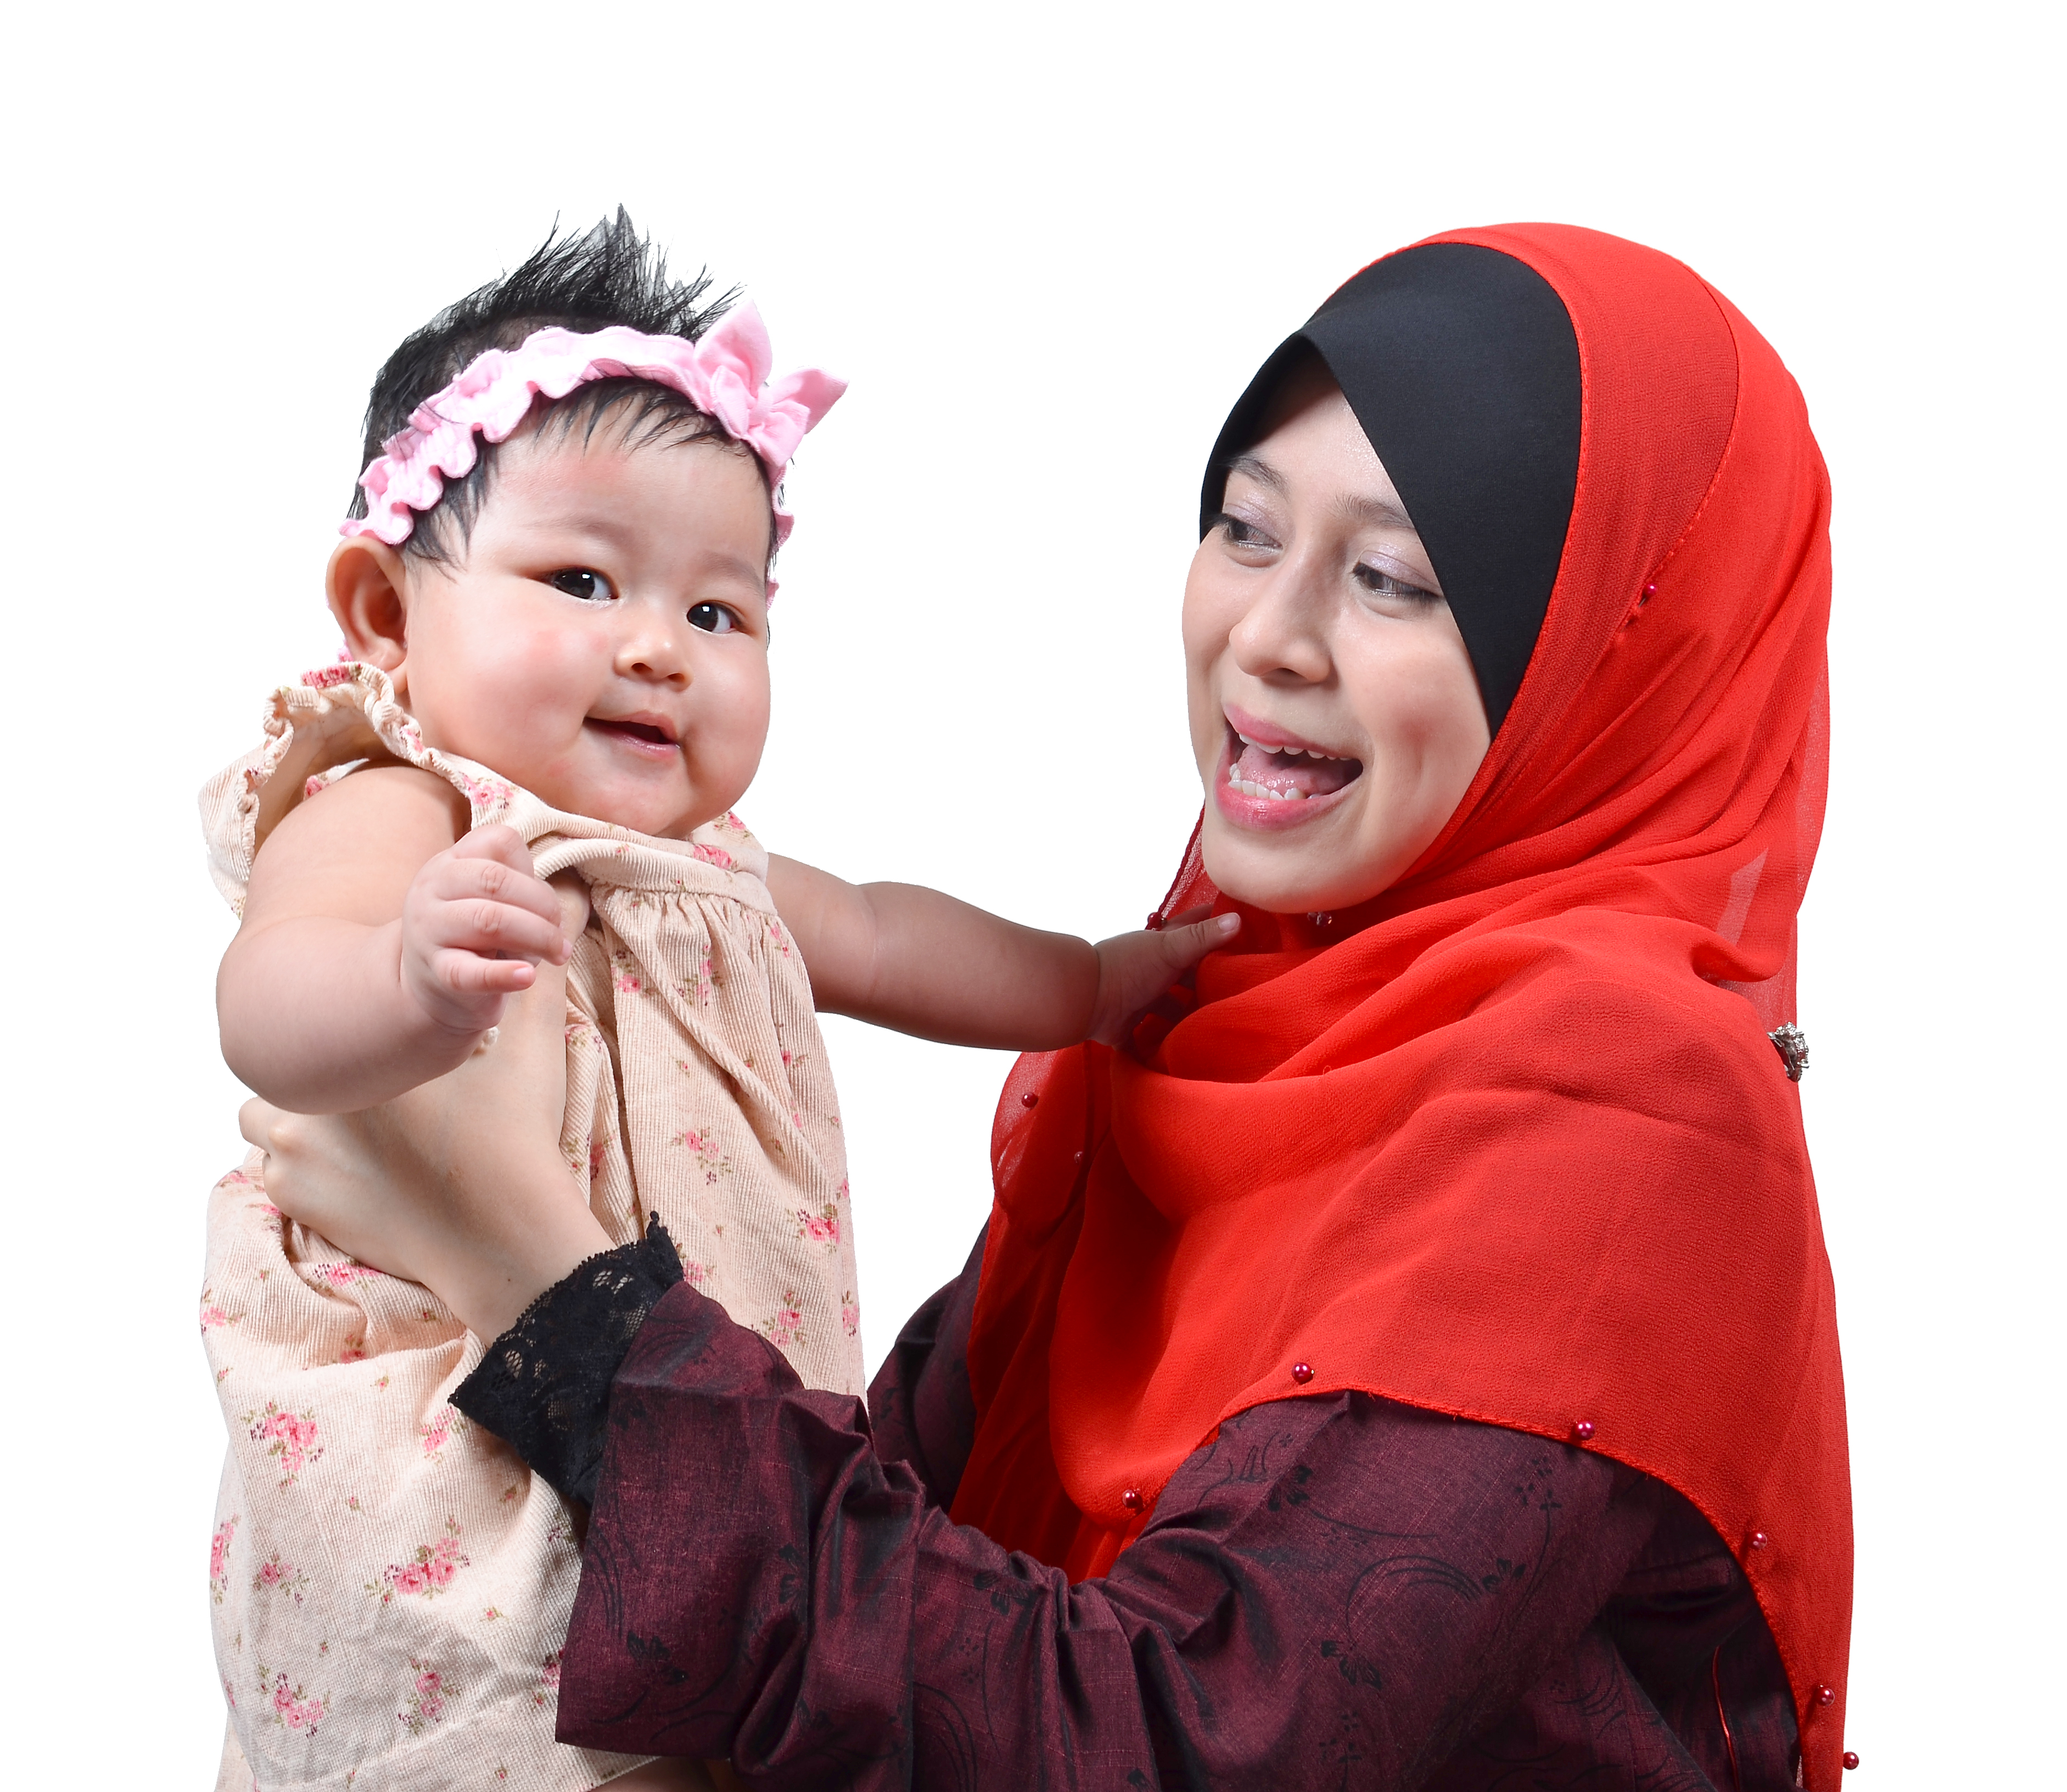 mother wearing red hijab lifts up smiling baby in pink